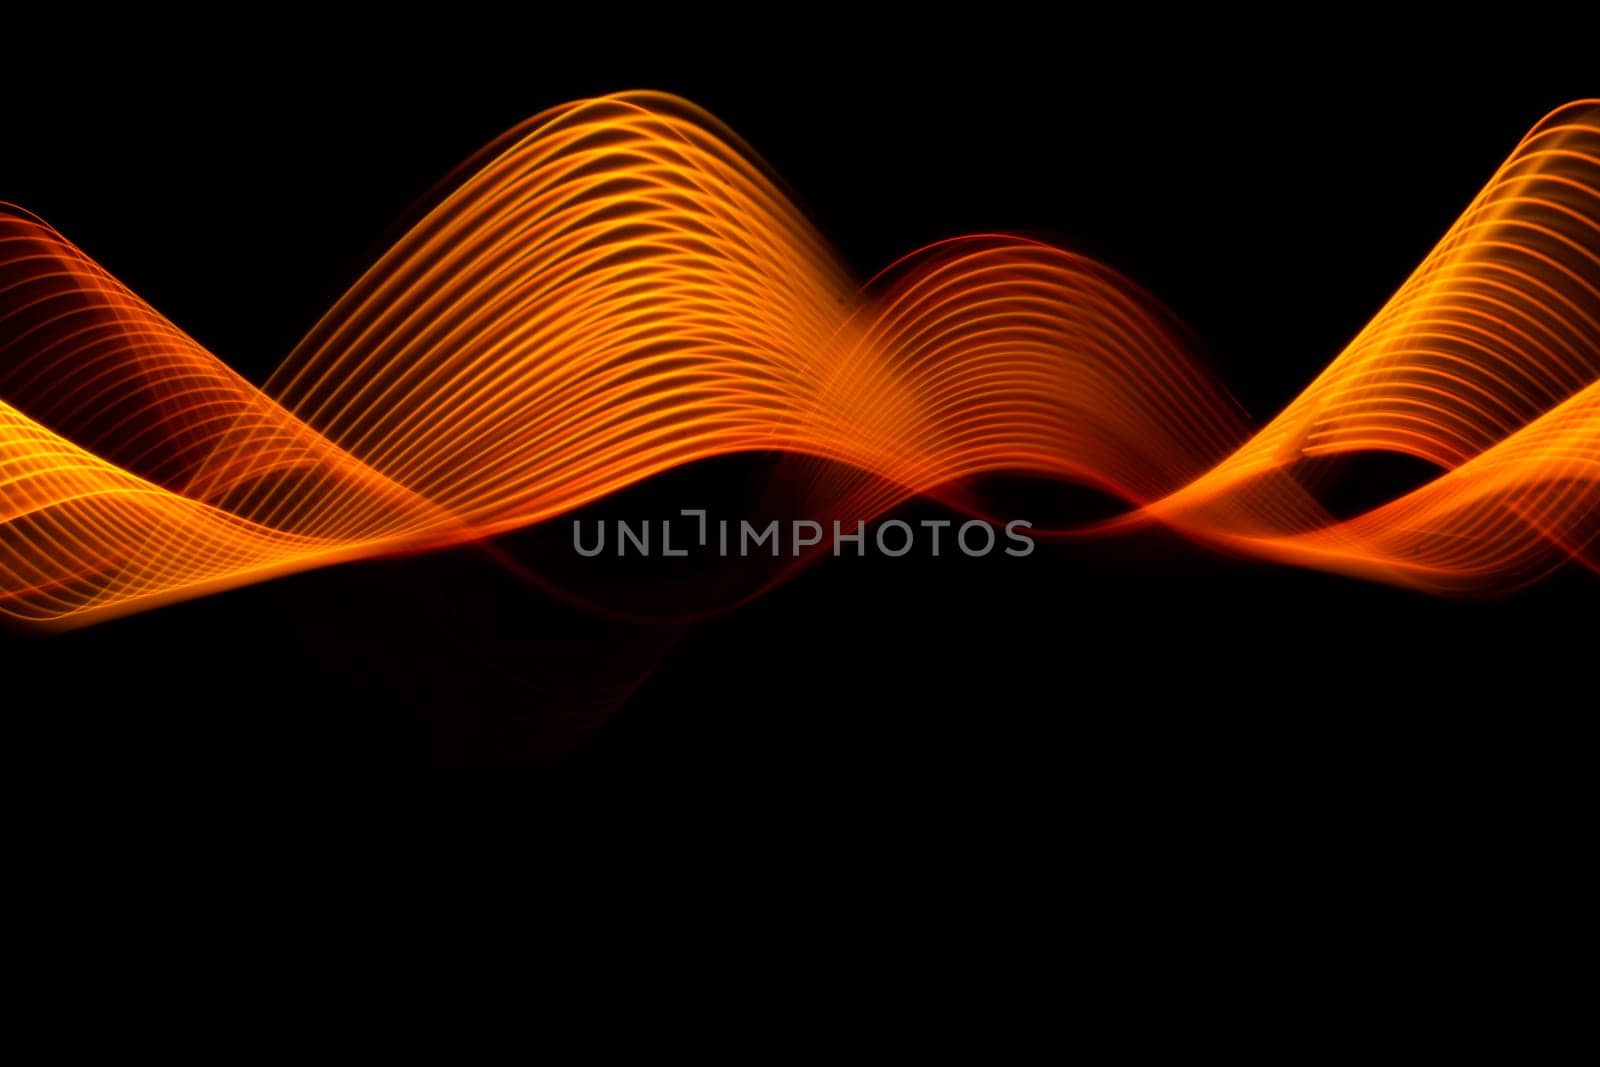 Neon lights glow and flash technology background with flying design elements. High quality photo